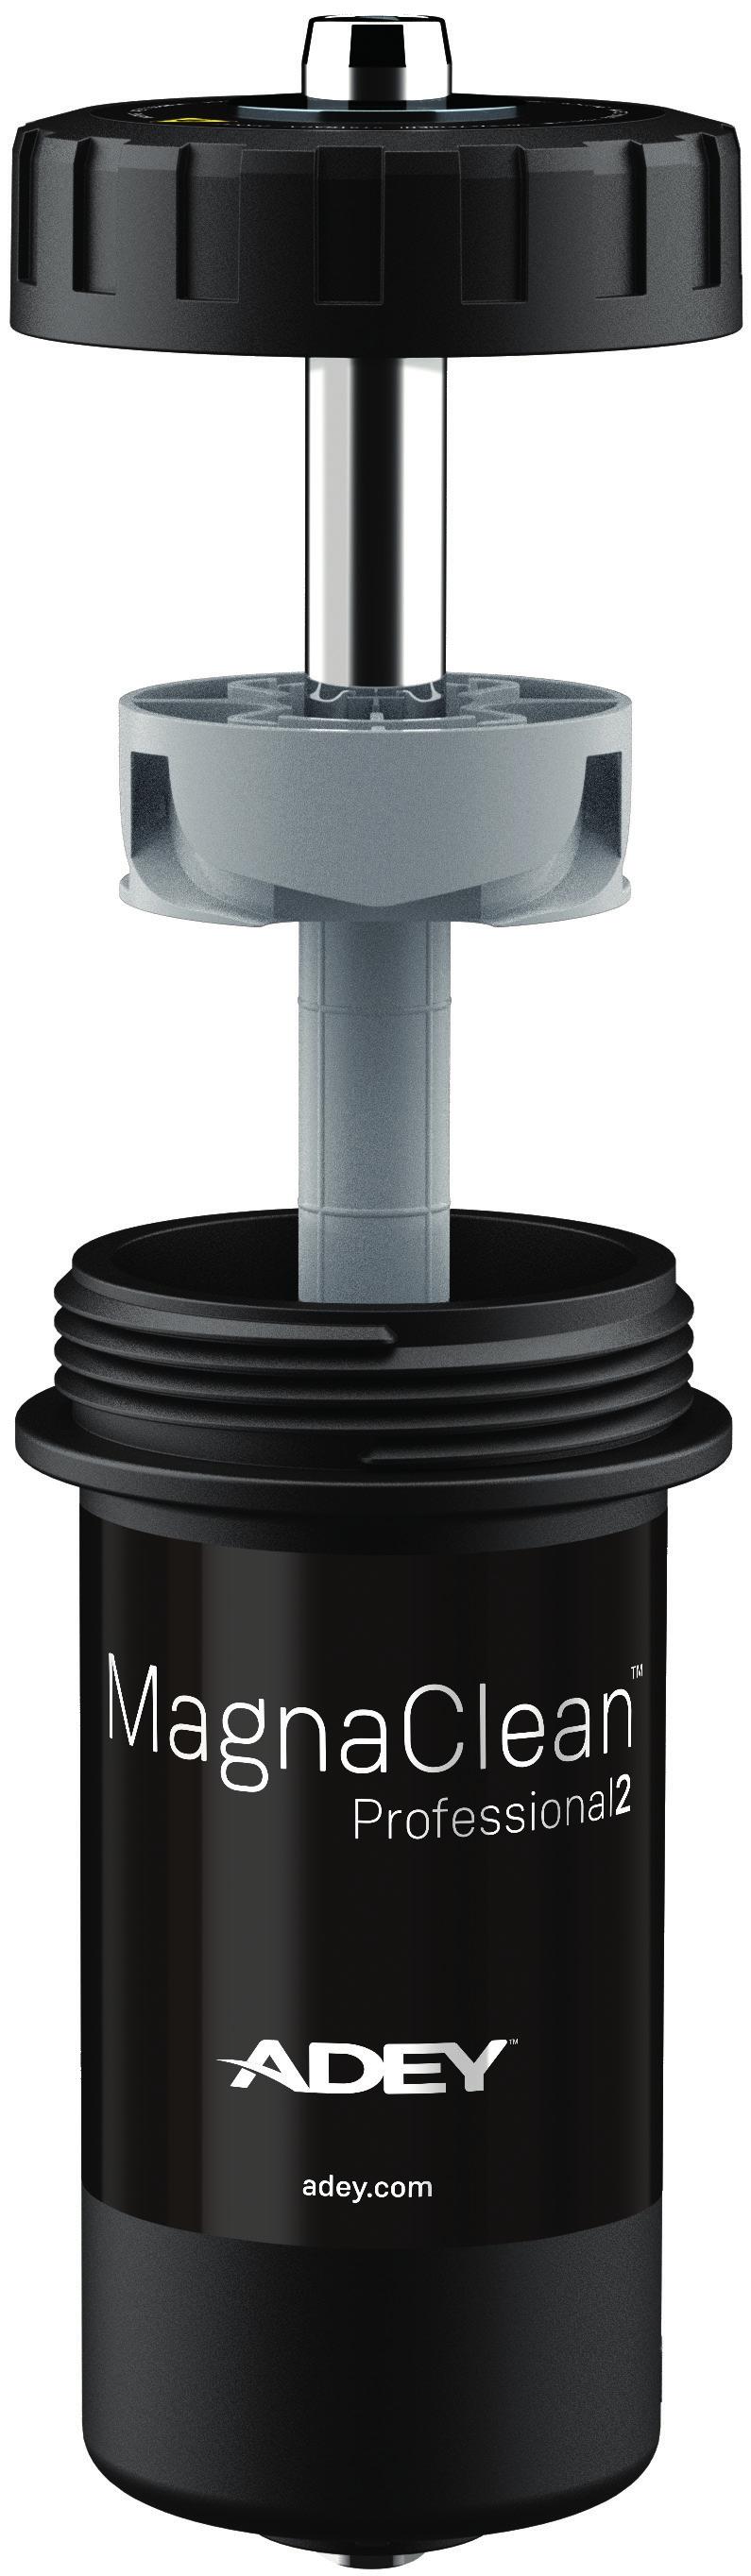 It s no wonder the MagnaClean Professional2 is the market leading magnetic filter due to its power and capacity to specifically target the removal of magnetite within central heating systems.